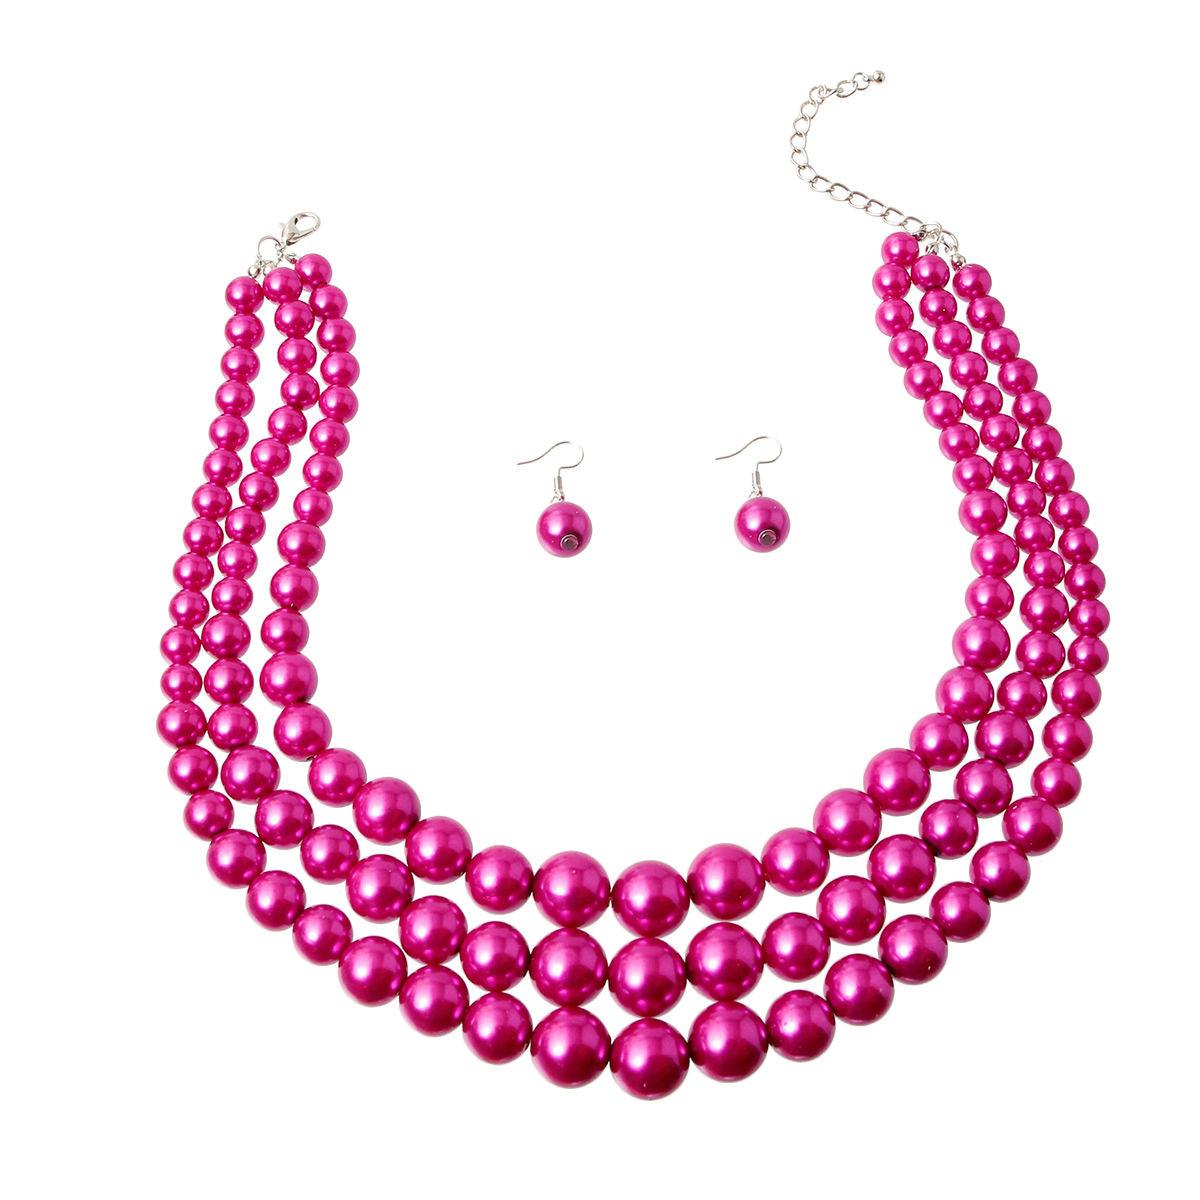 Lustrous Celebration Triple Strand Pink Pearl Necklace Set - Stunning Gems for Unforgettable Moments!